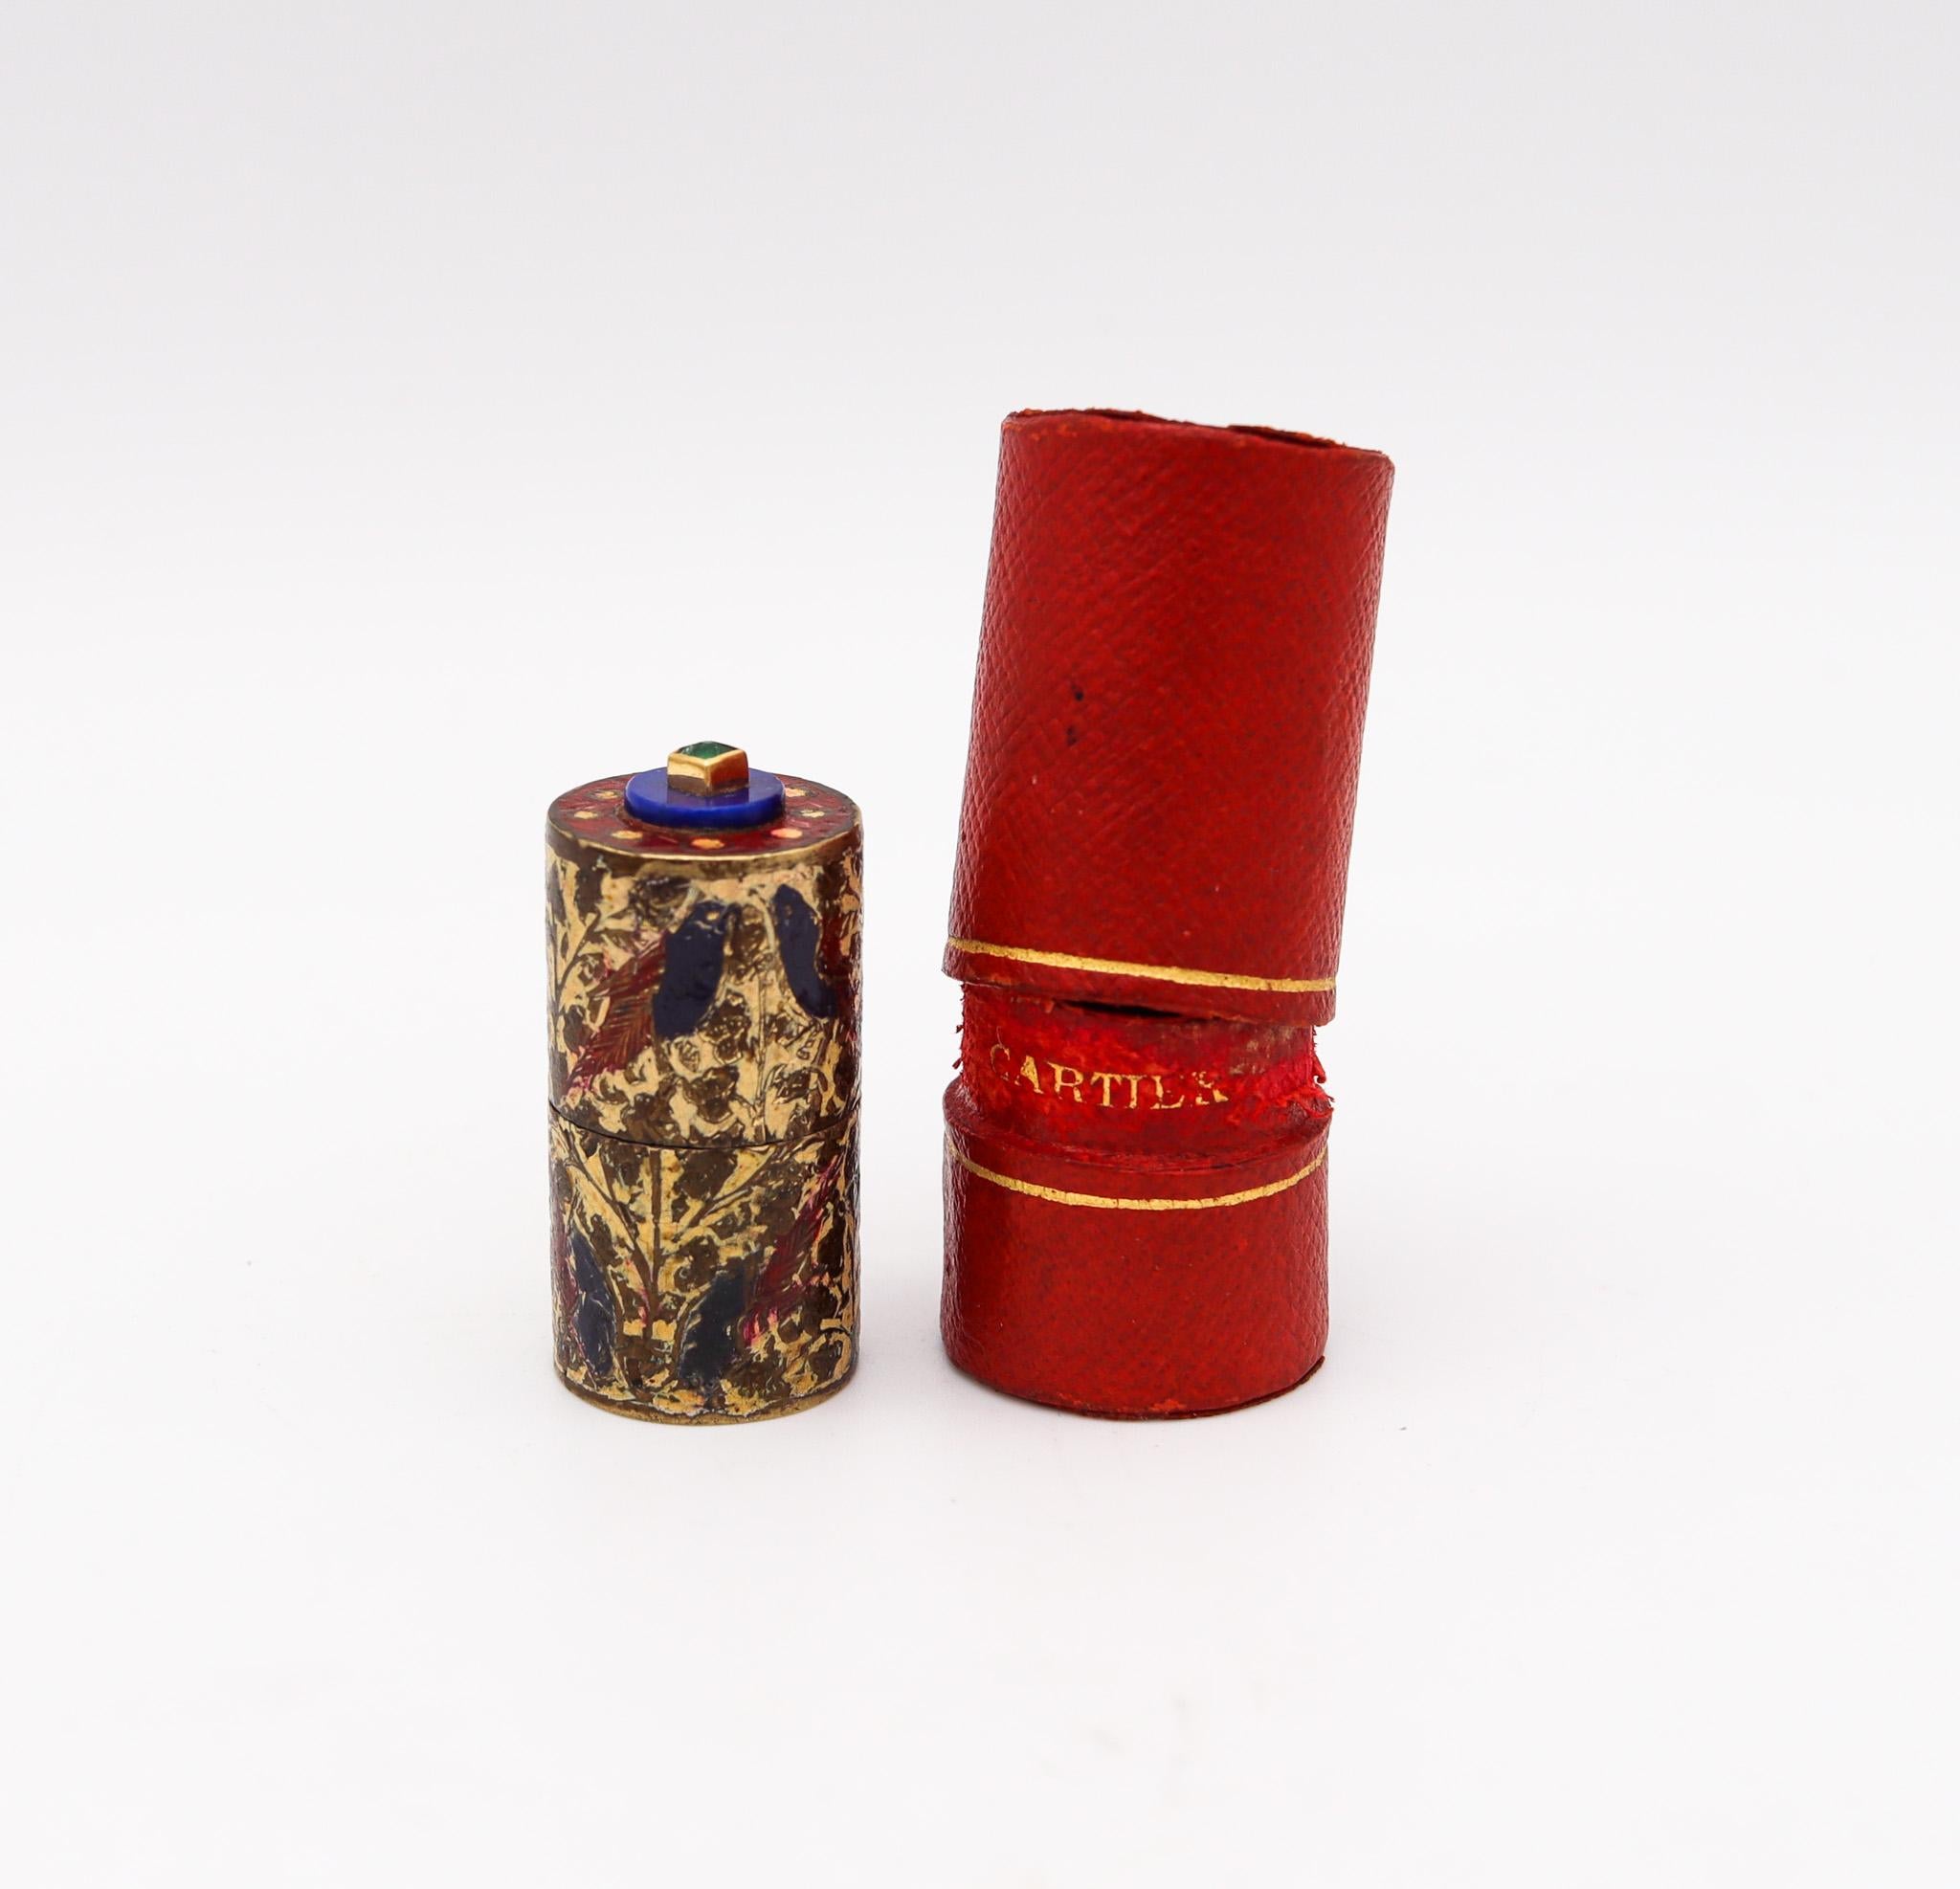 Mughal ladies Tom Pouce lighter designed by Cartier.

Fabulous and extremely rare ladies cylindrical gasoline lighter. Created in Paris during the art deco period by the house of Cartier, back in the middle of the 1920's. This miniature Tom Pouce